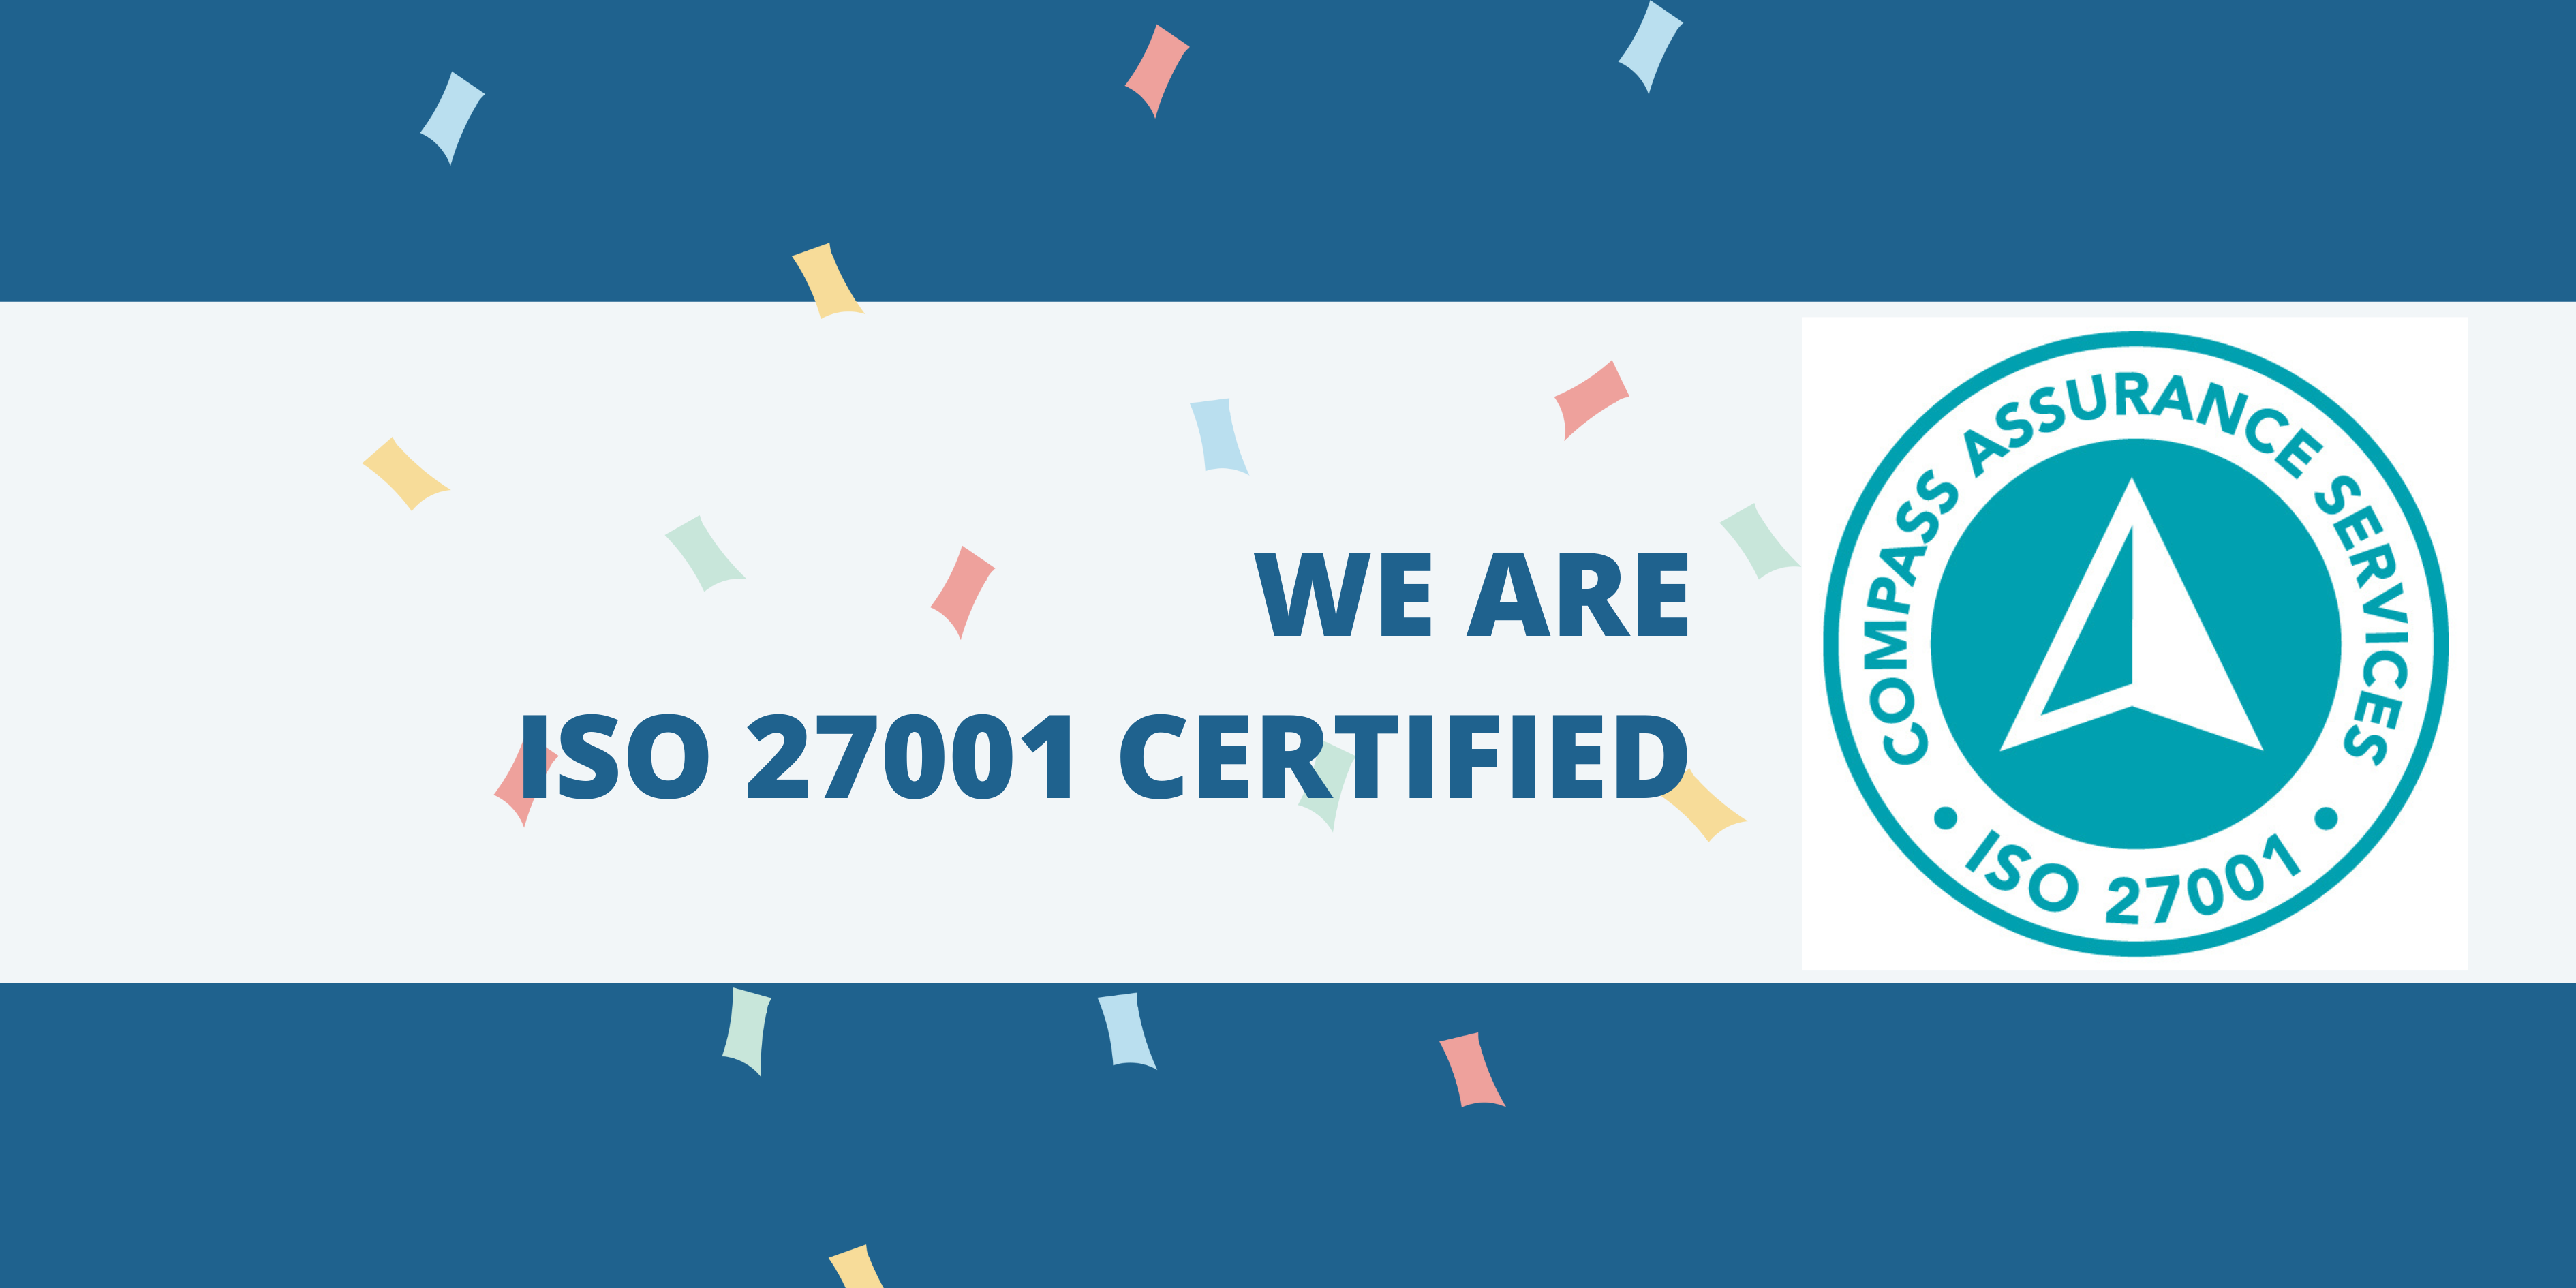 We are ISO 27001 Certified